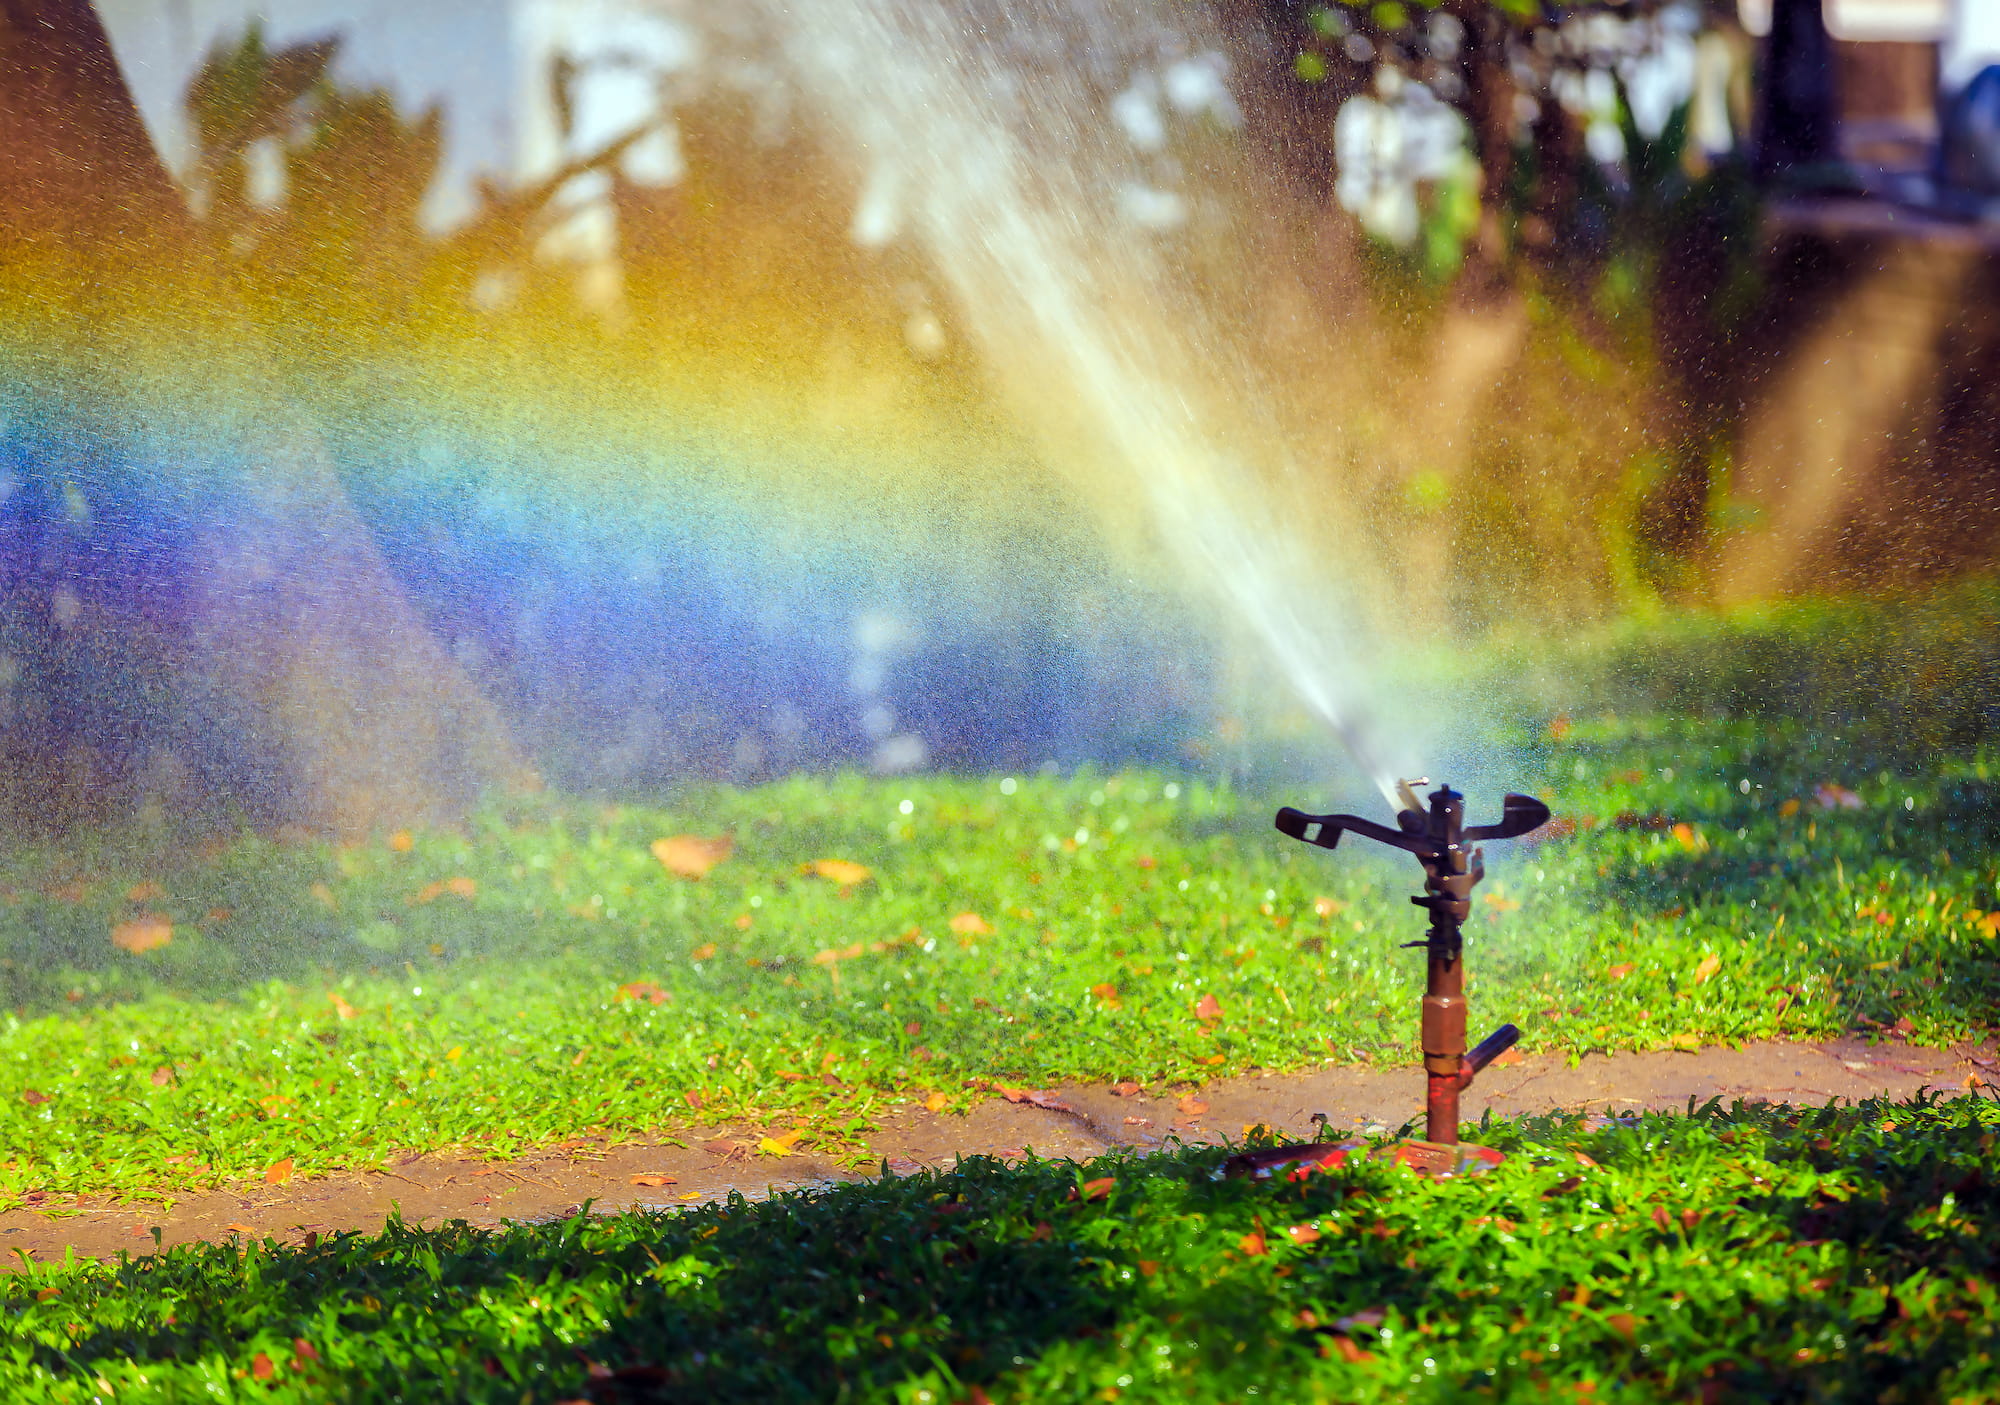 Need an irrigation company near you? Greenway Irrigation serves Raleigh-Durham residents year-round.